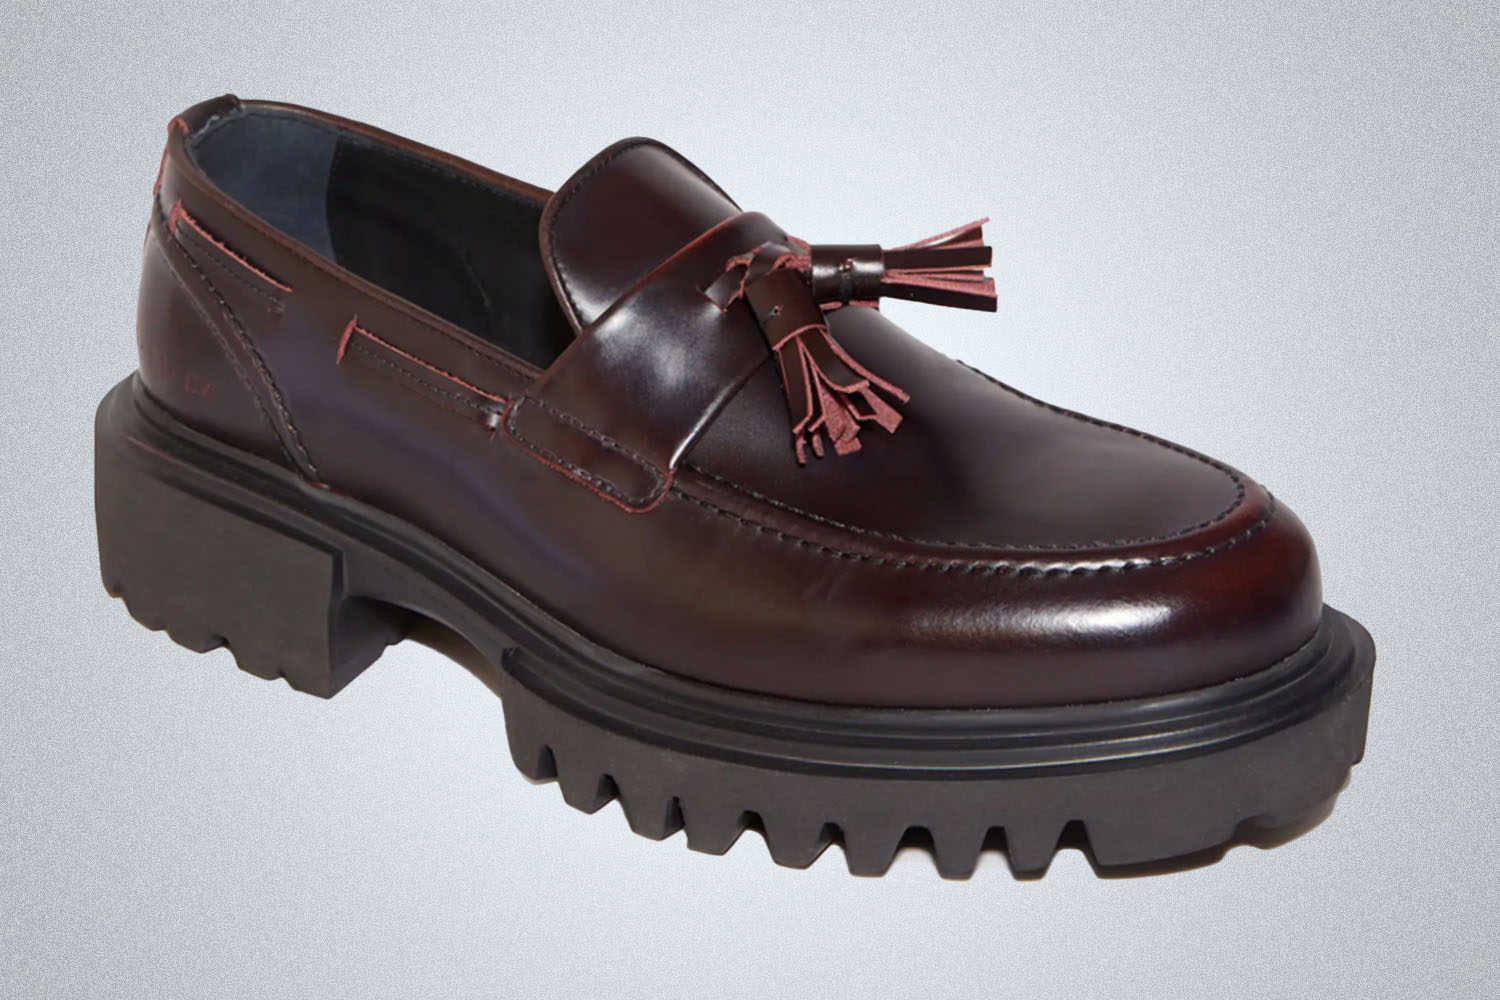 a pair of brown leather lug sole loafers from All Saints on a grey background